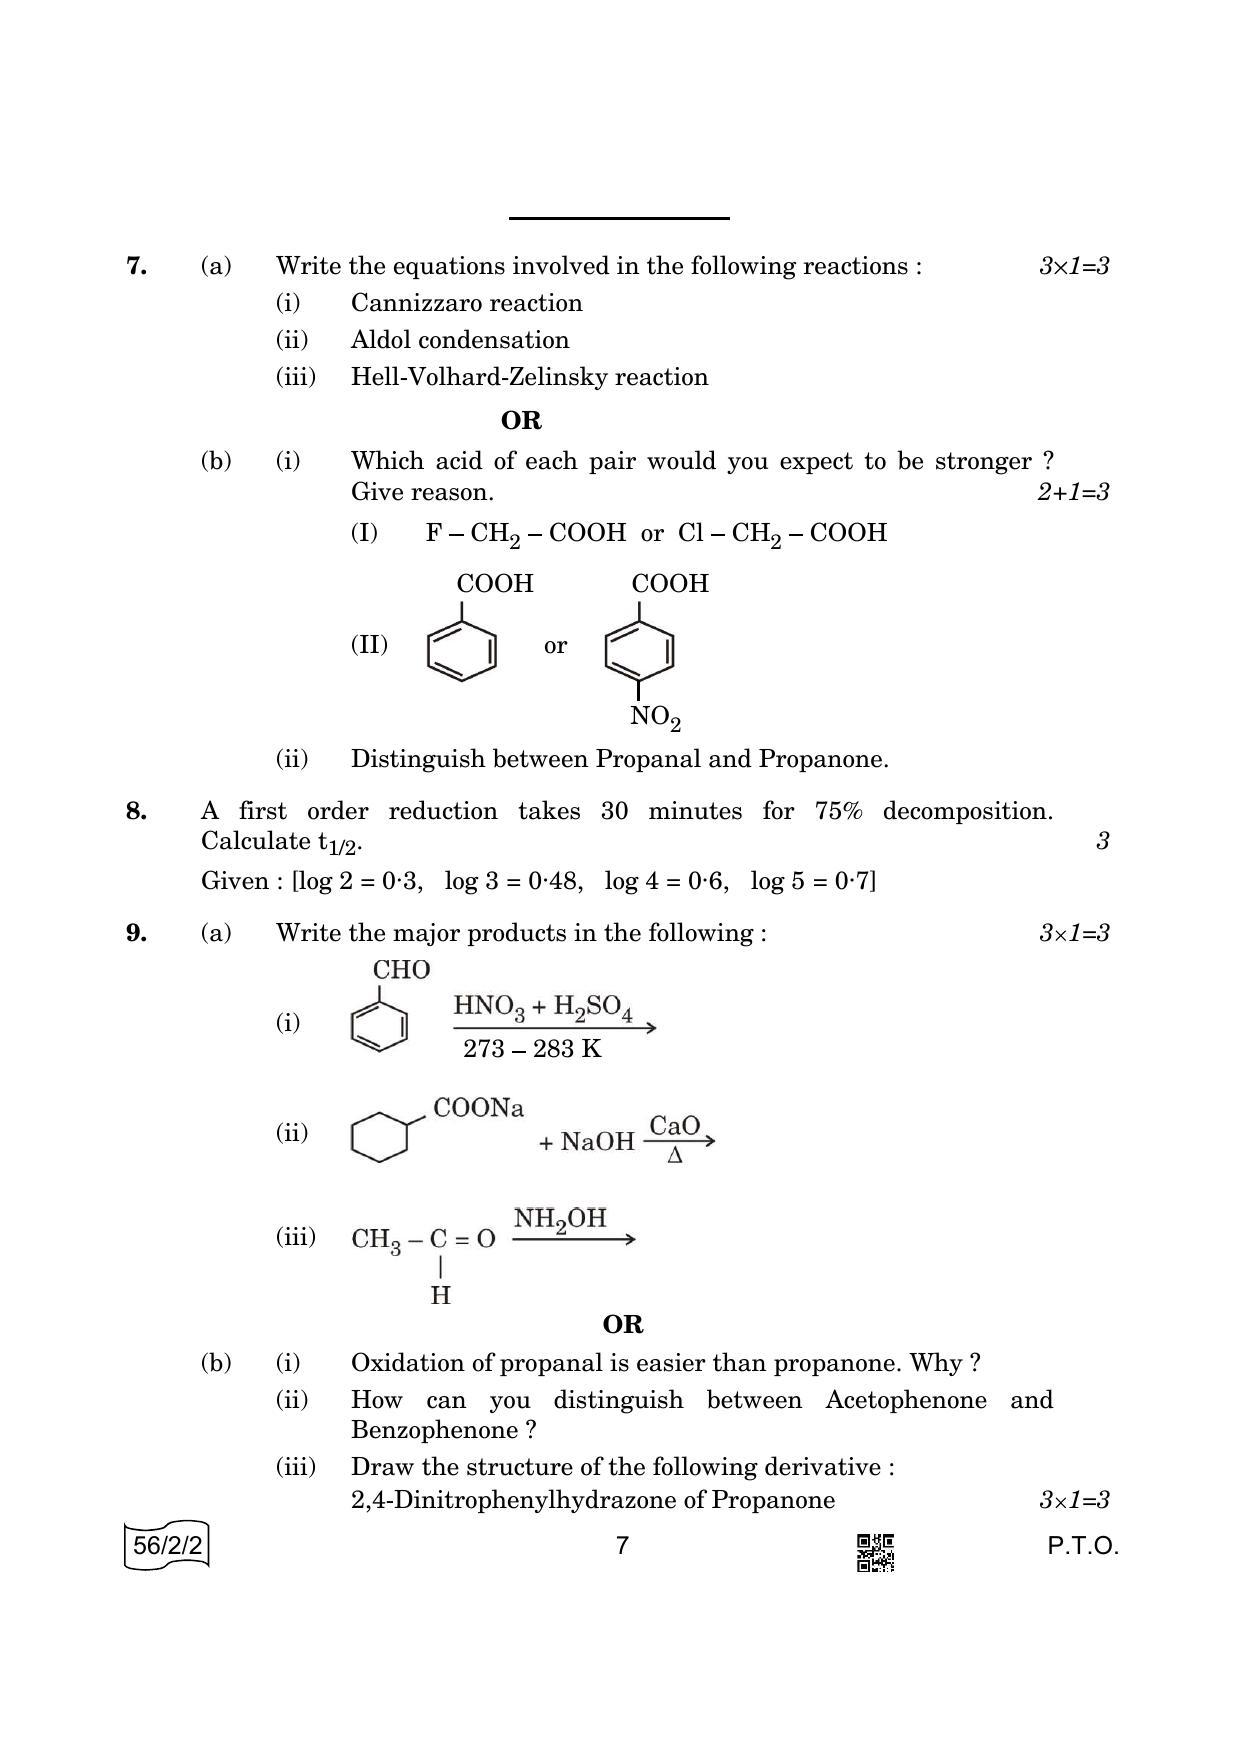 CBSE Class 12 56-2-2 Chemistry 2022 Question Paper - Page 7